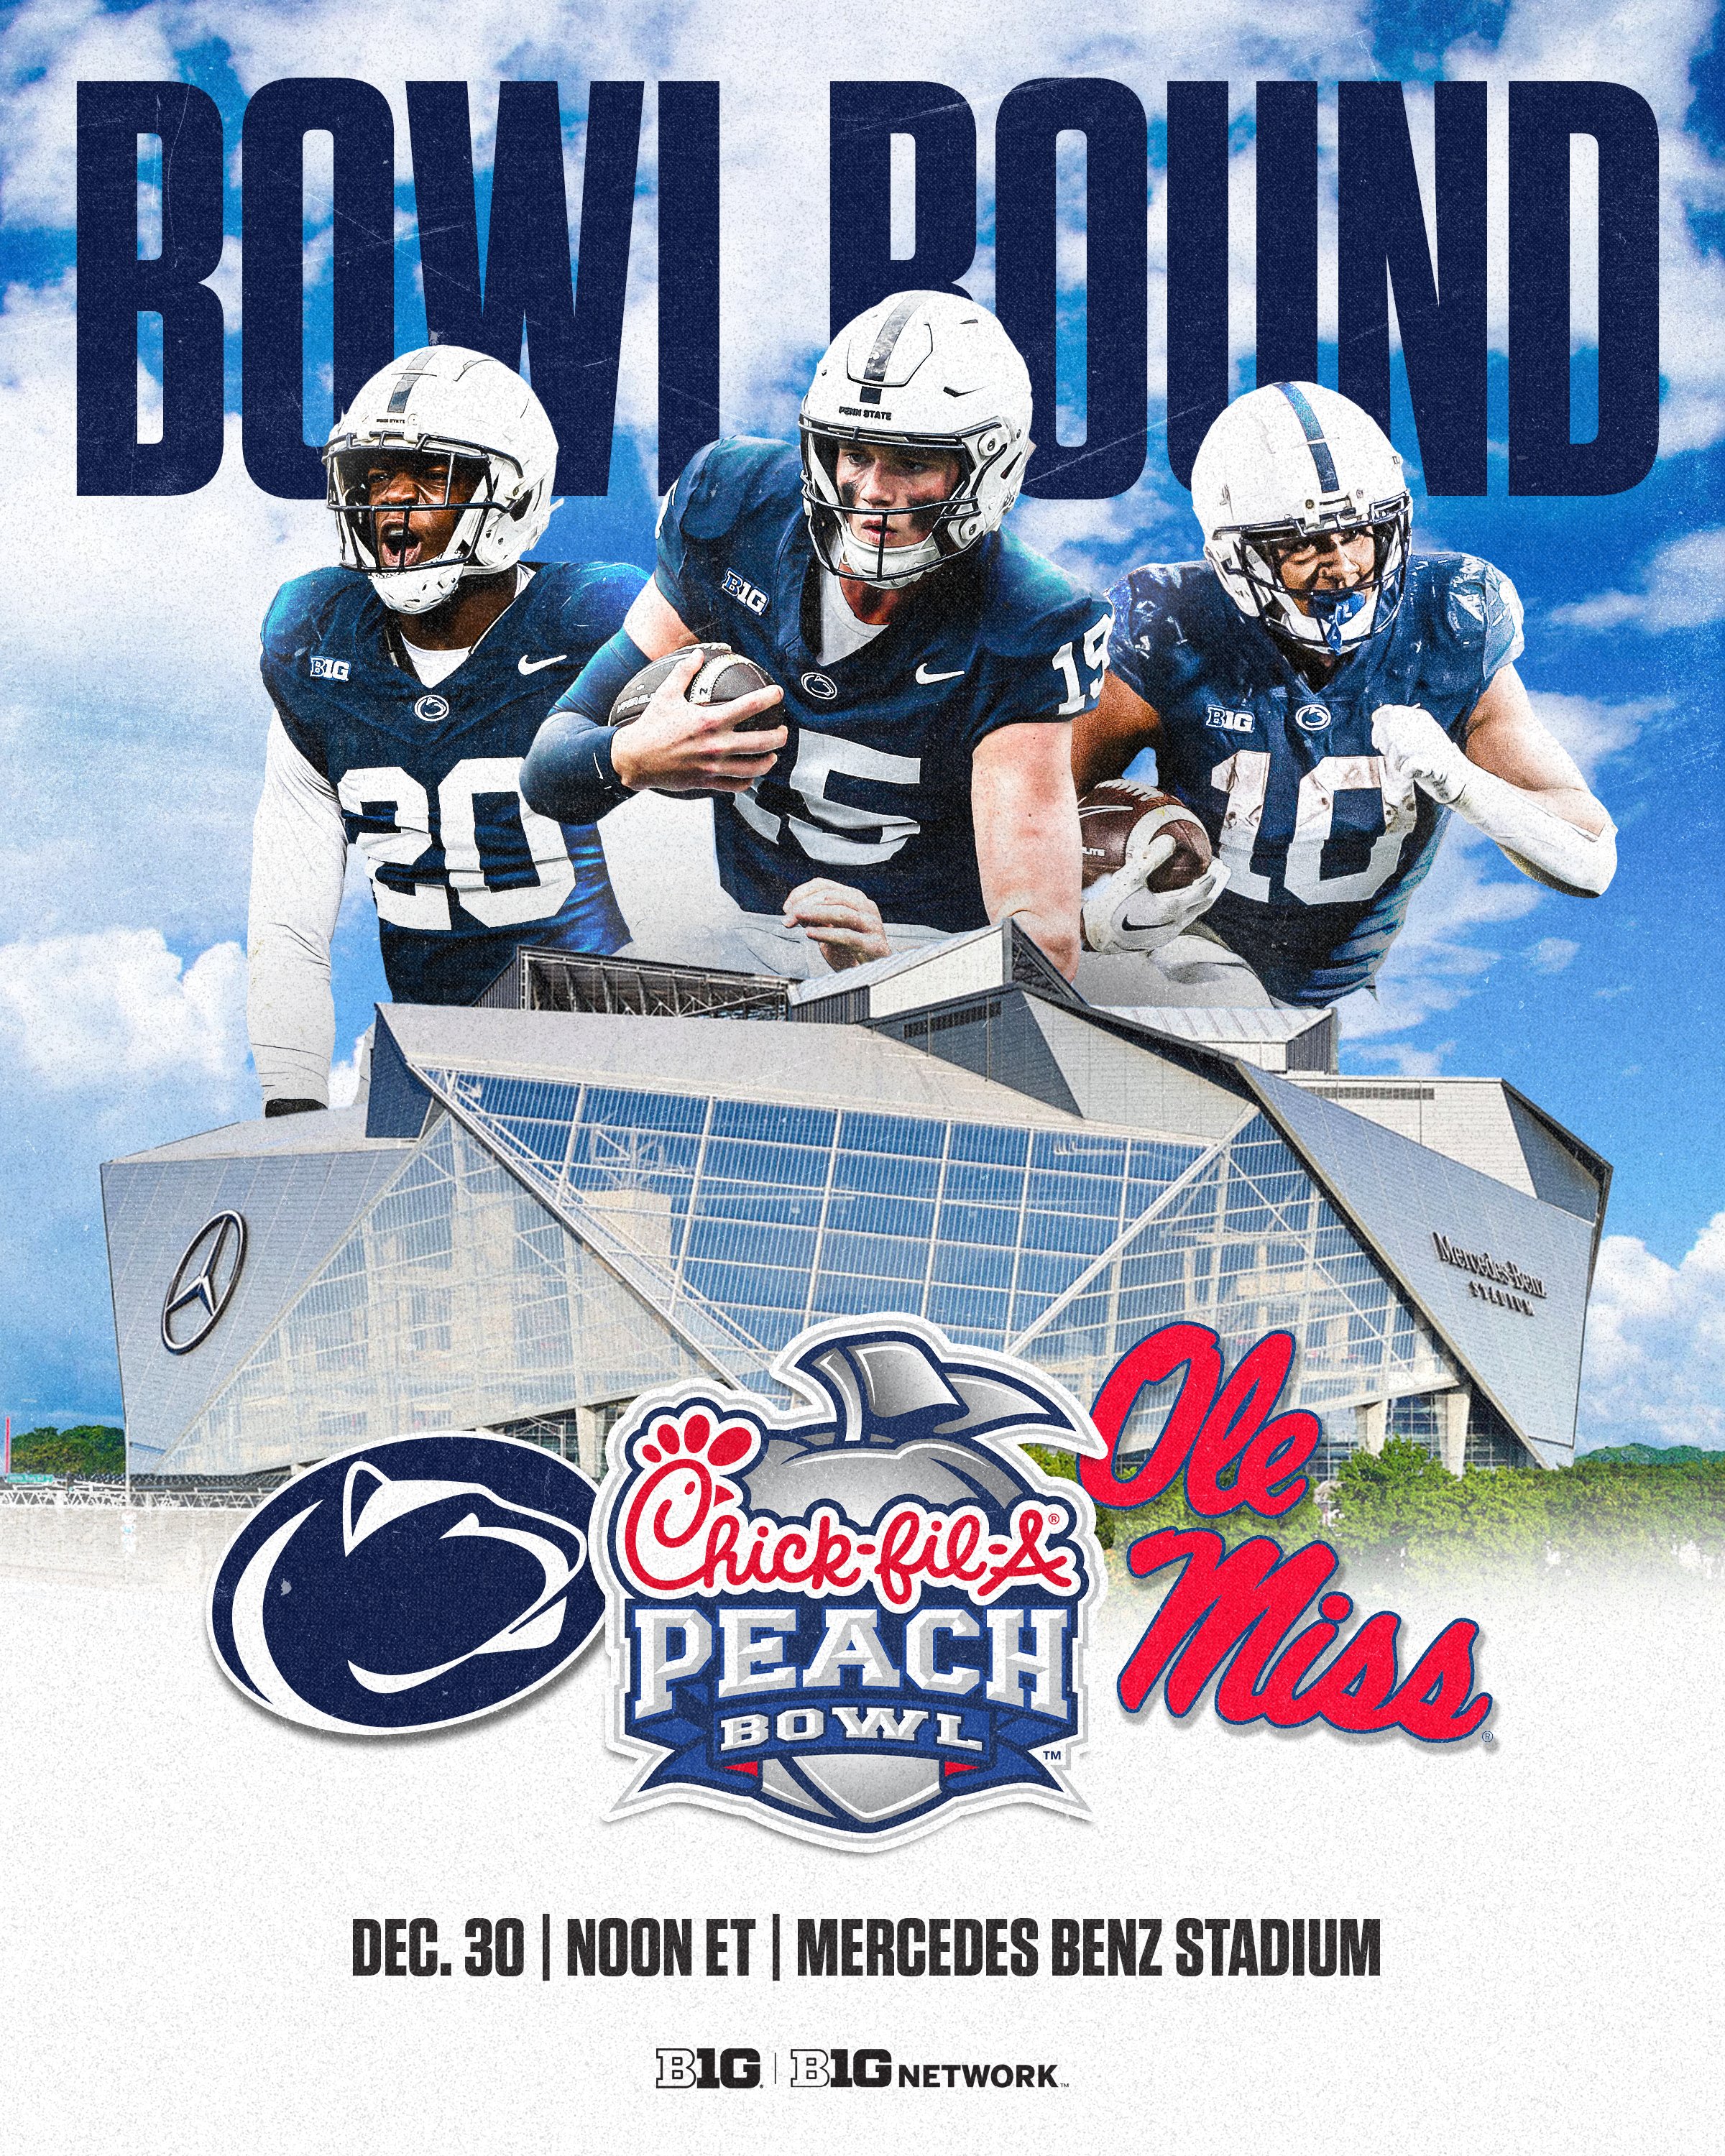 Big Ten Football on X: "PSU ➡️ ATL No. 10 Penn State will face No. 11 Ole  Miss in the Peach Bowl. 🍑 https://t.co/qOg9sE8zE5" / X